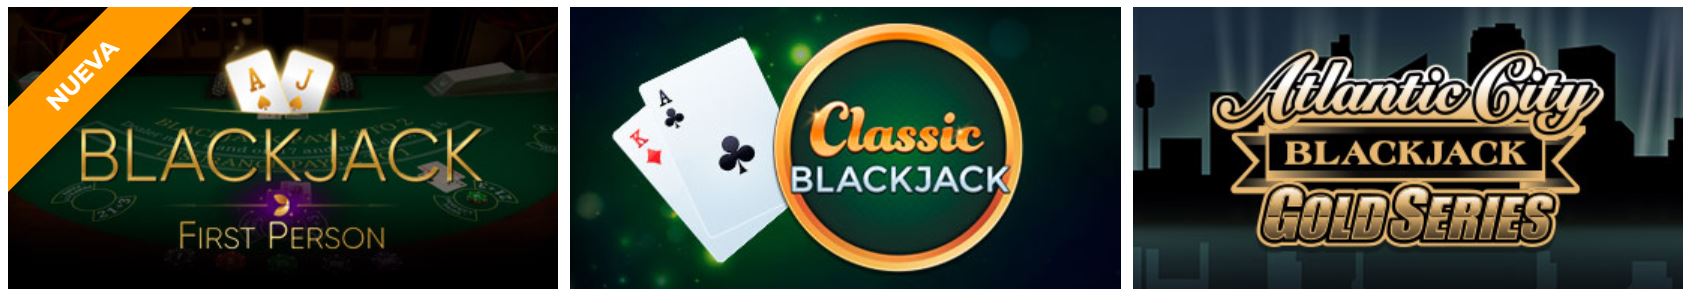 You can play blackjack at this online gaming site.